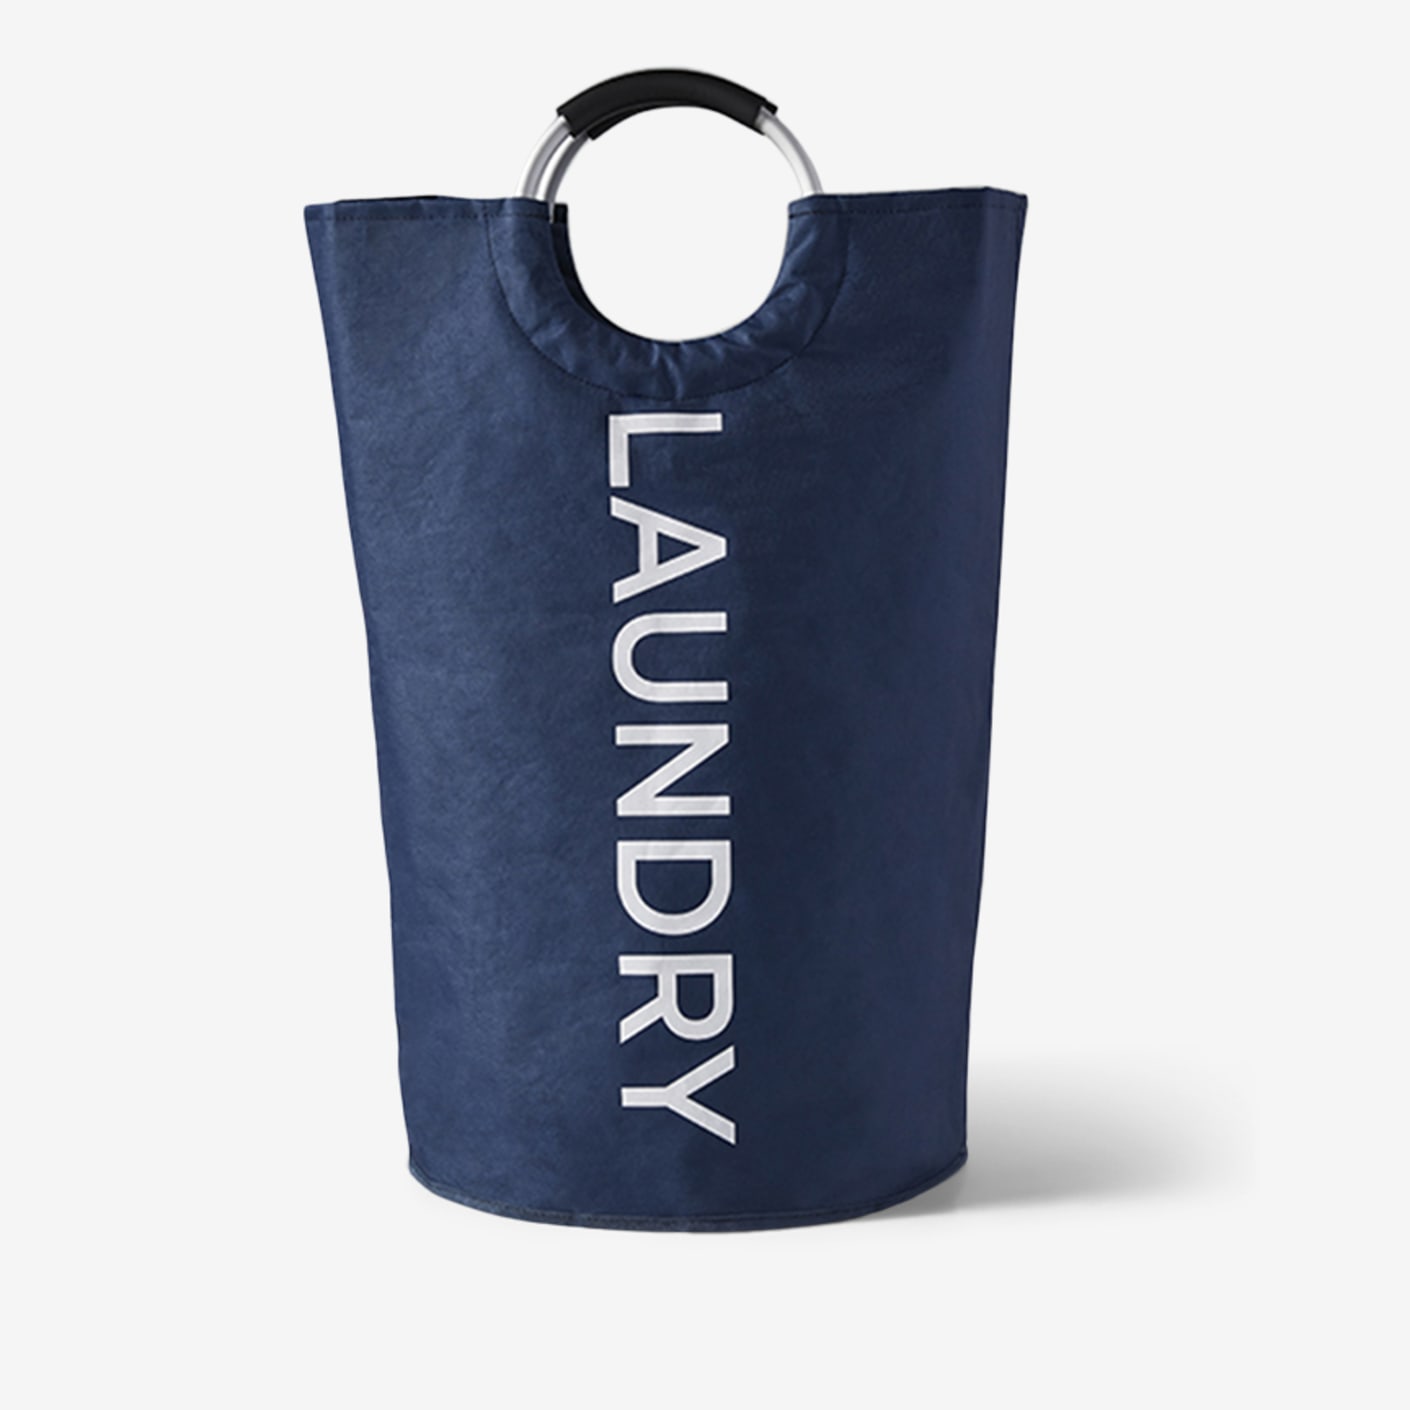 Boon Supply Laundry Tote | Bespoke Post